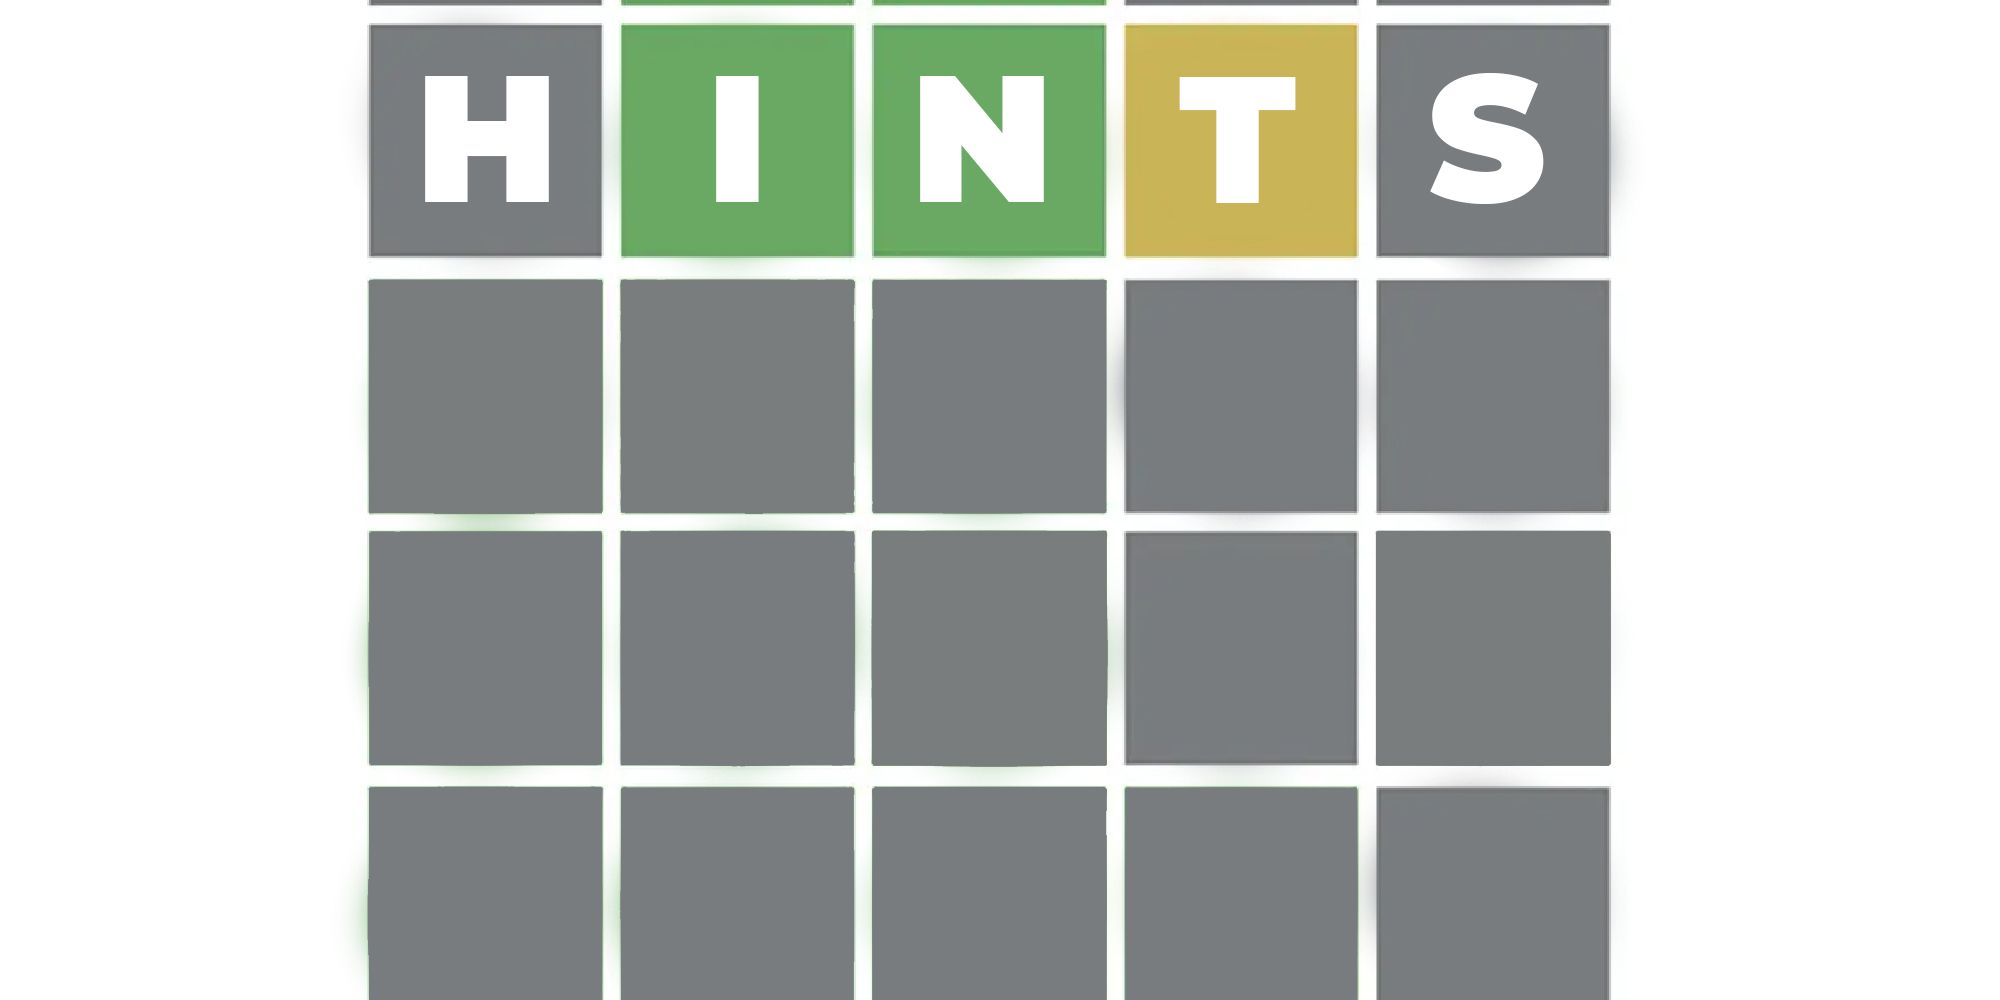 A Wordle grid that says 'Hints'.